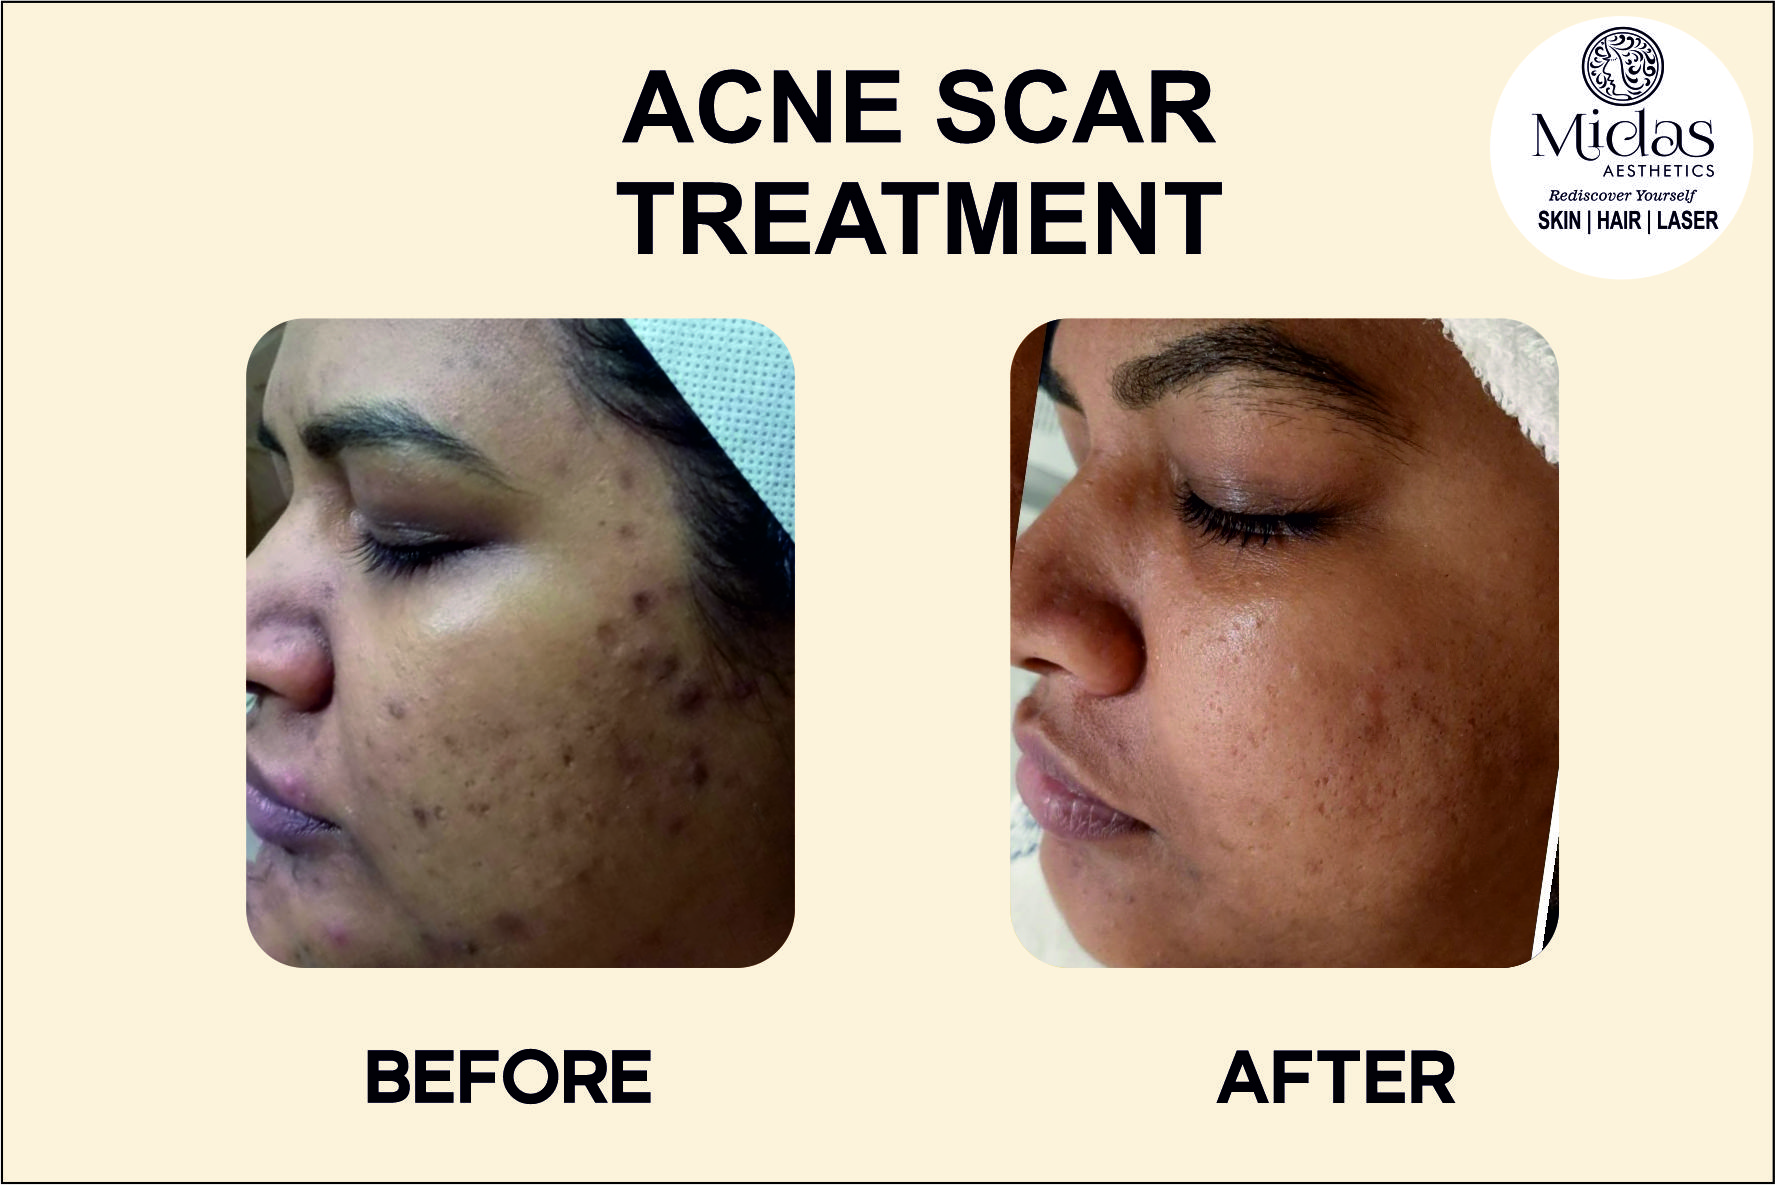 Acne Scar treatment before and after images